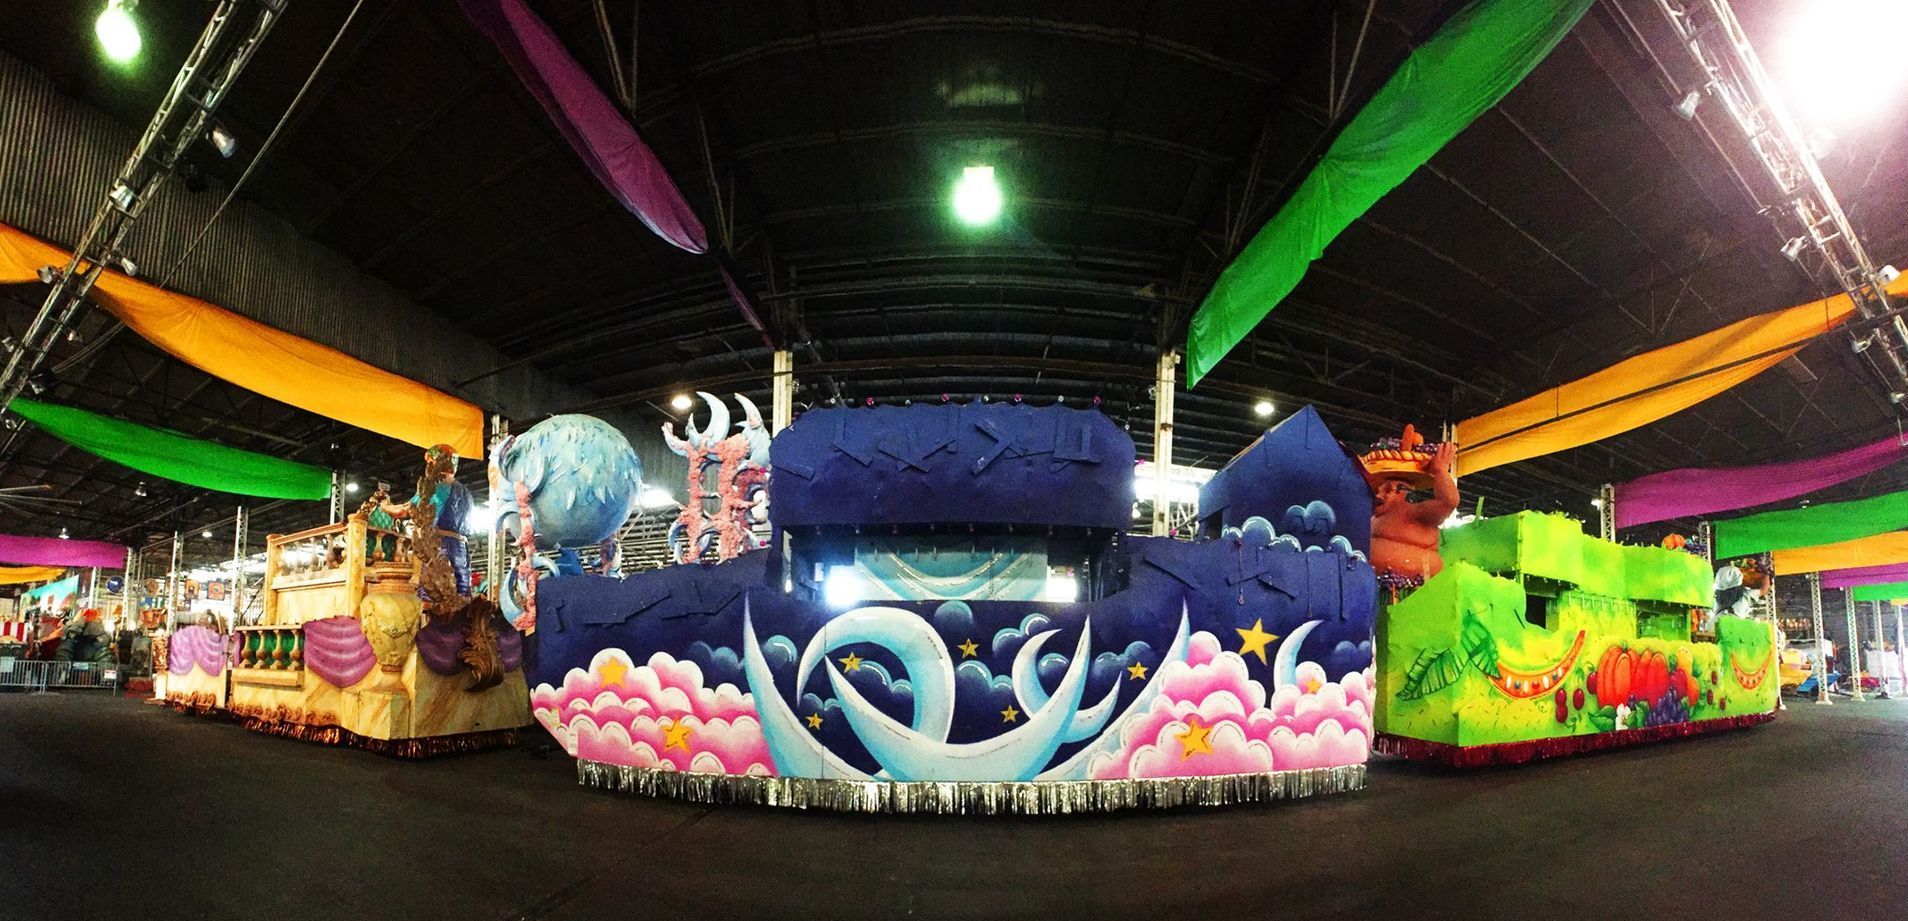  World's largest float designing and building facility: world record in New Orleans, Louisiana